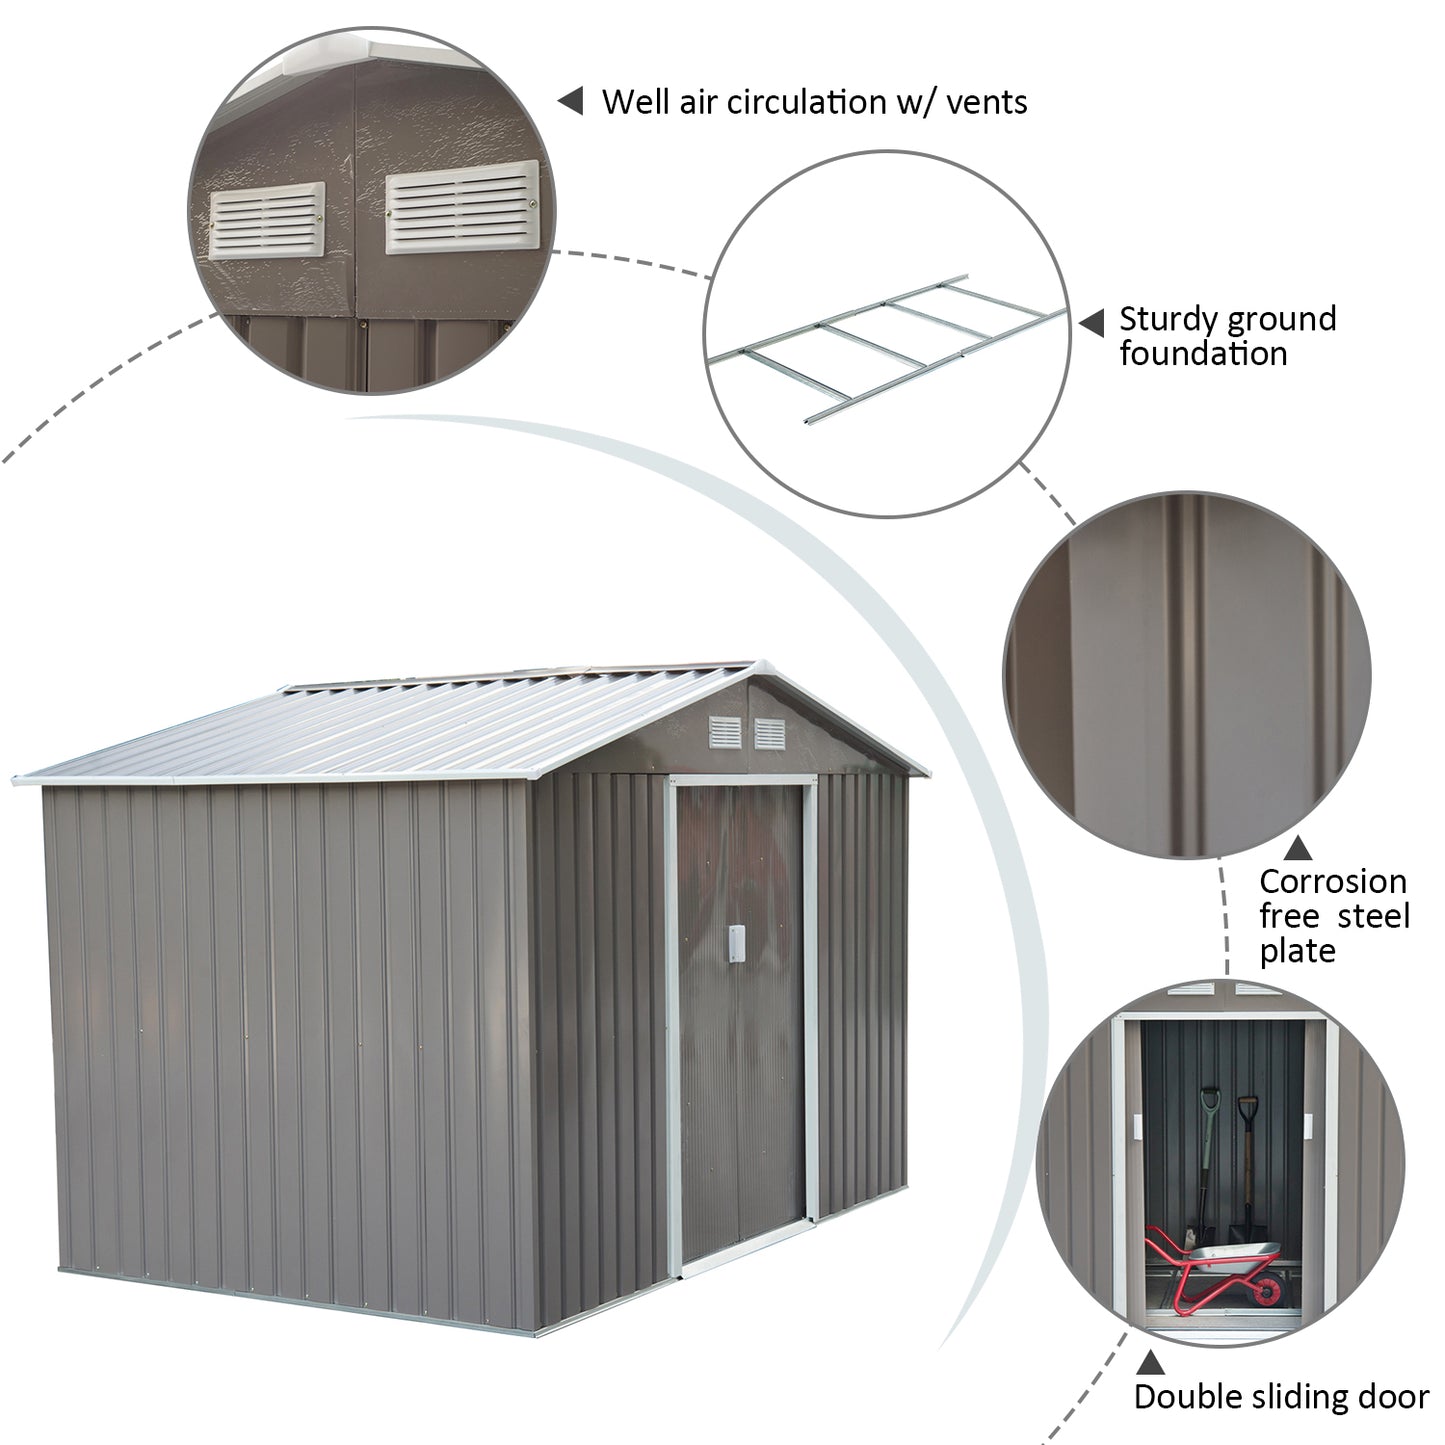 Outsunny 6.2 x 9ft Galvanized Steel Garden Shed & Foundation - Grey